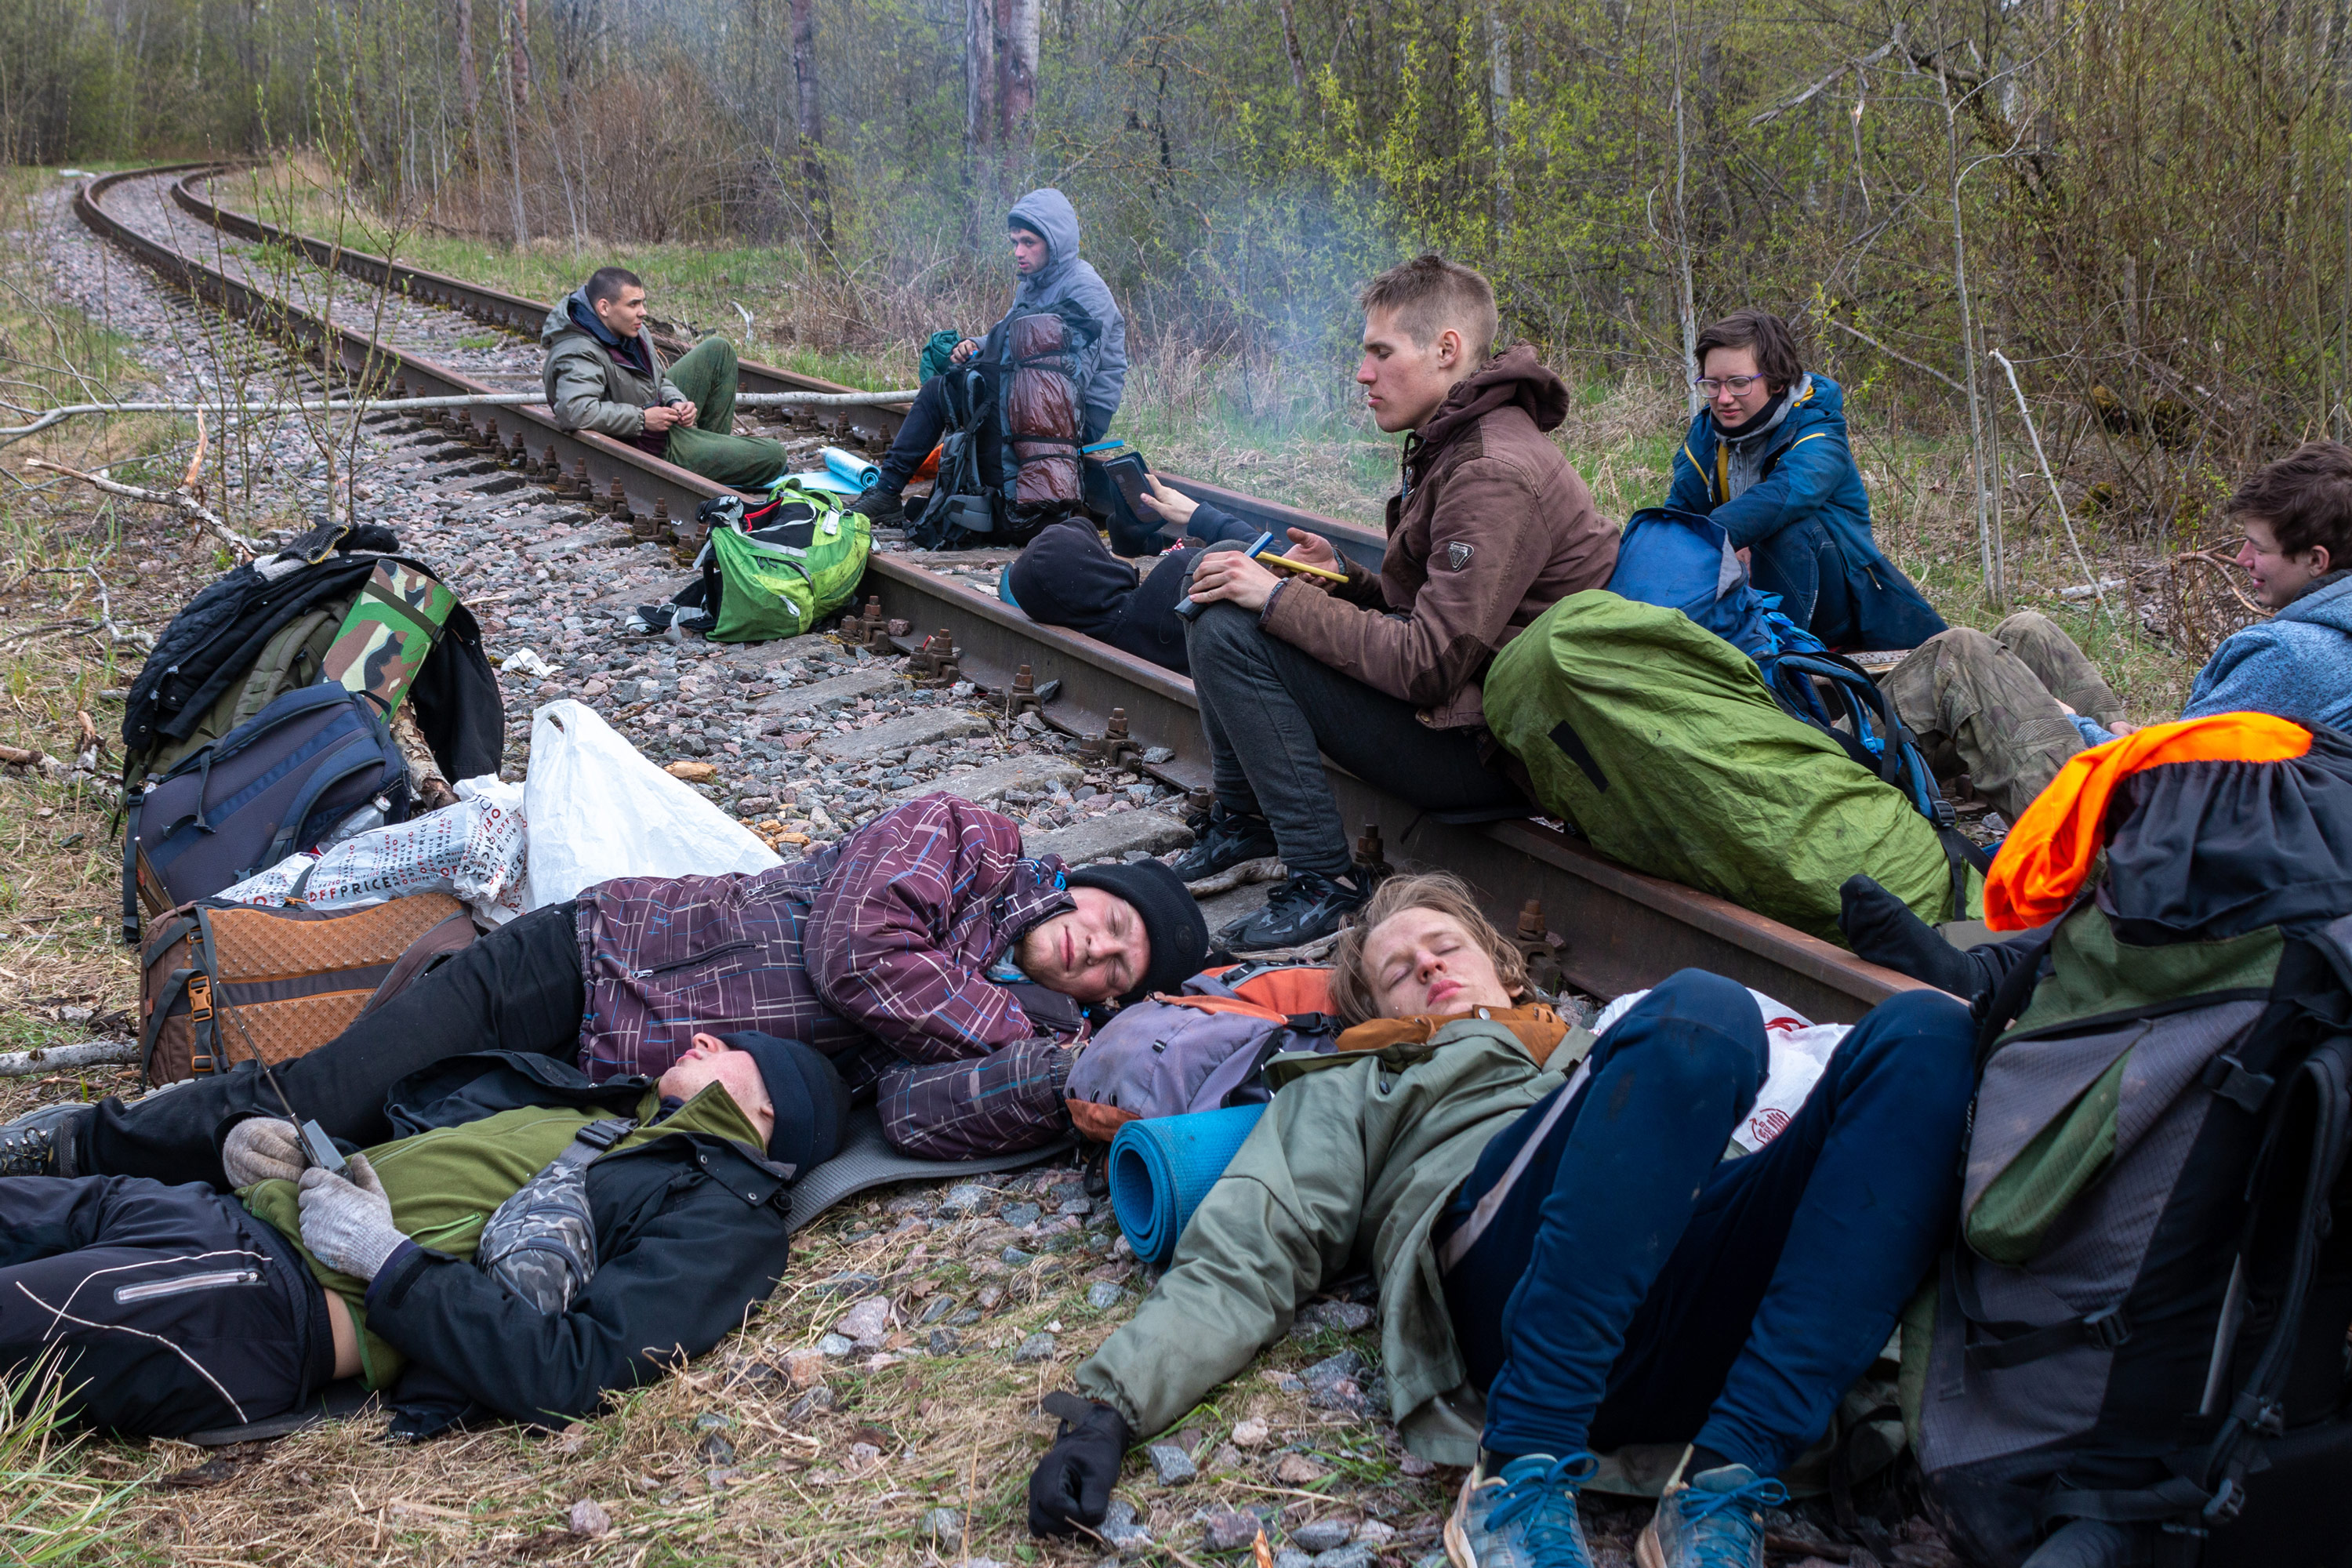 The guys resting on the abandoned tracks waiting for the train to come. Sometimes the waiting takes up to 12 hours.